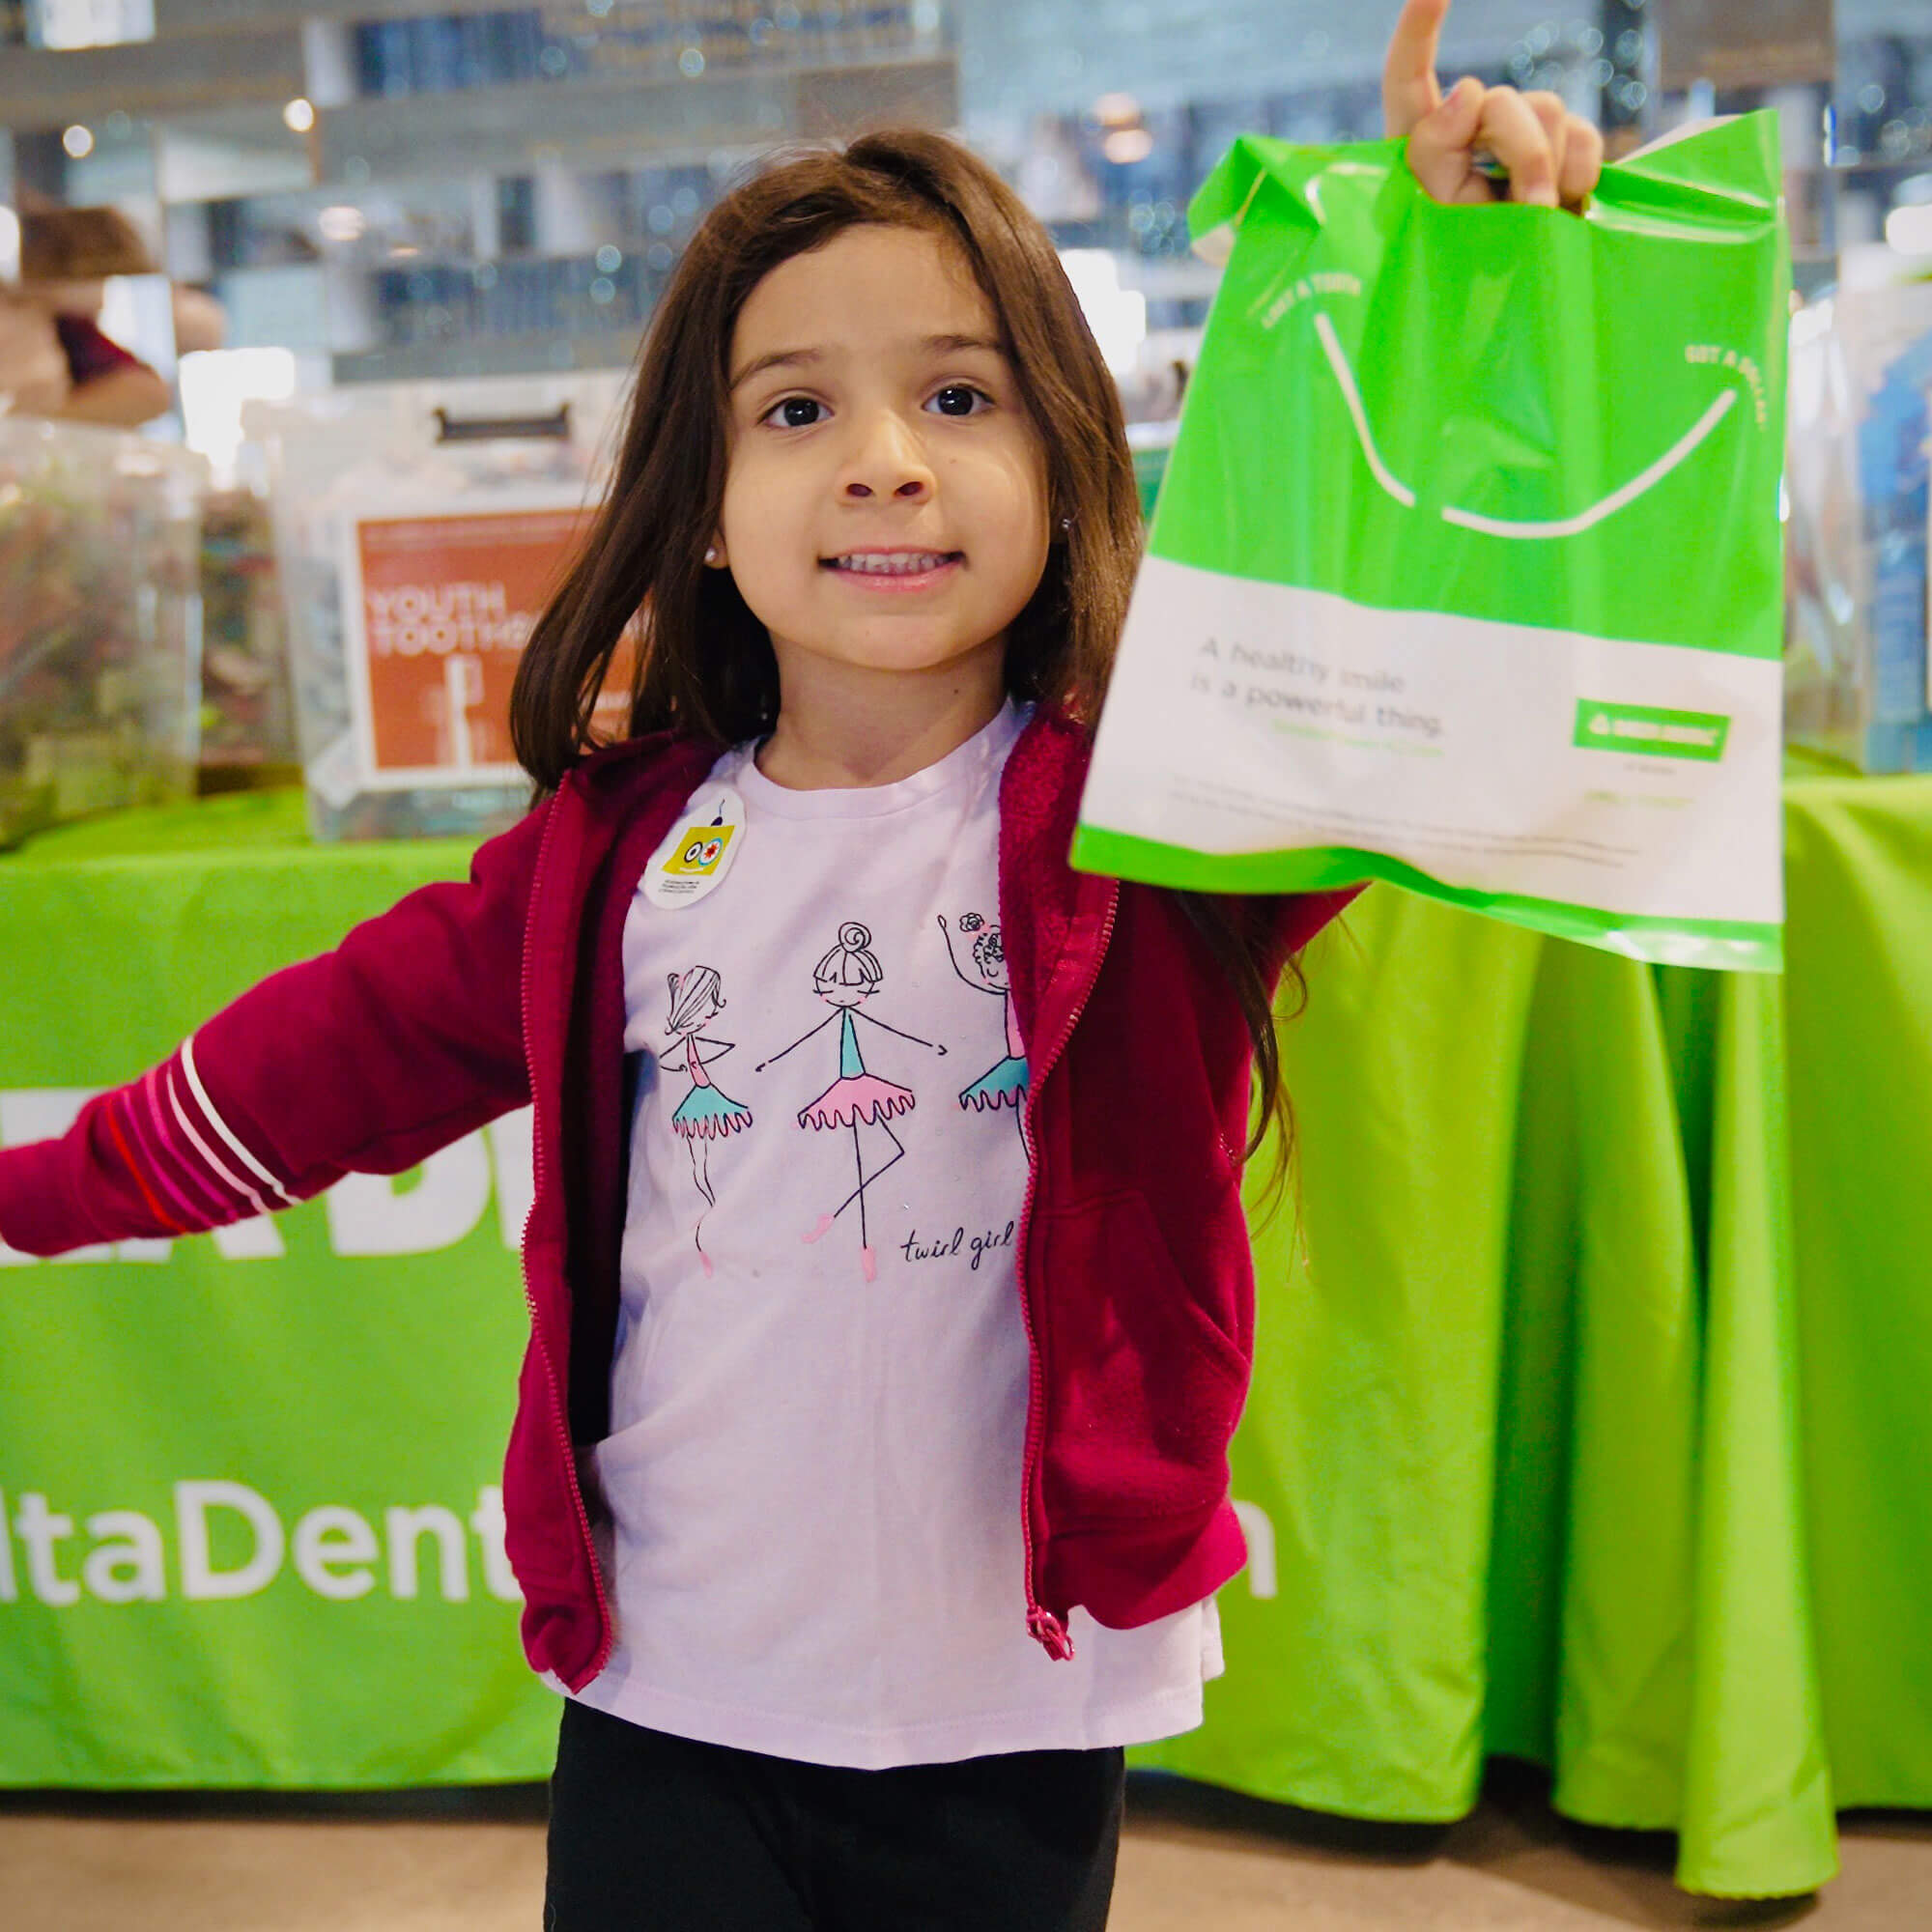 A young girl happily holds a bag of dental supplies, ready to take care of her teeth and maintain a healthy smile.